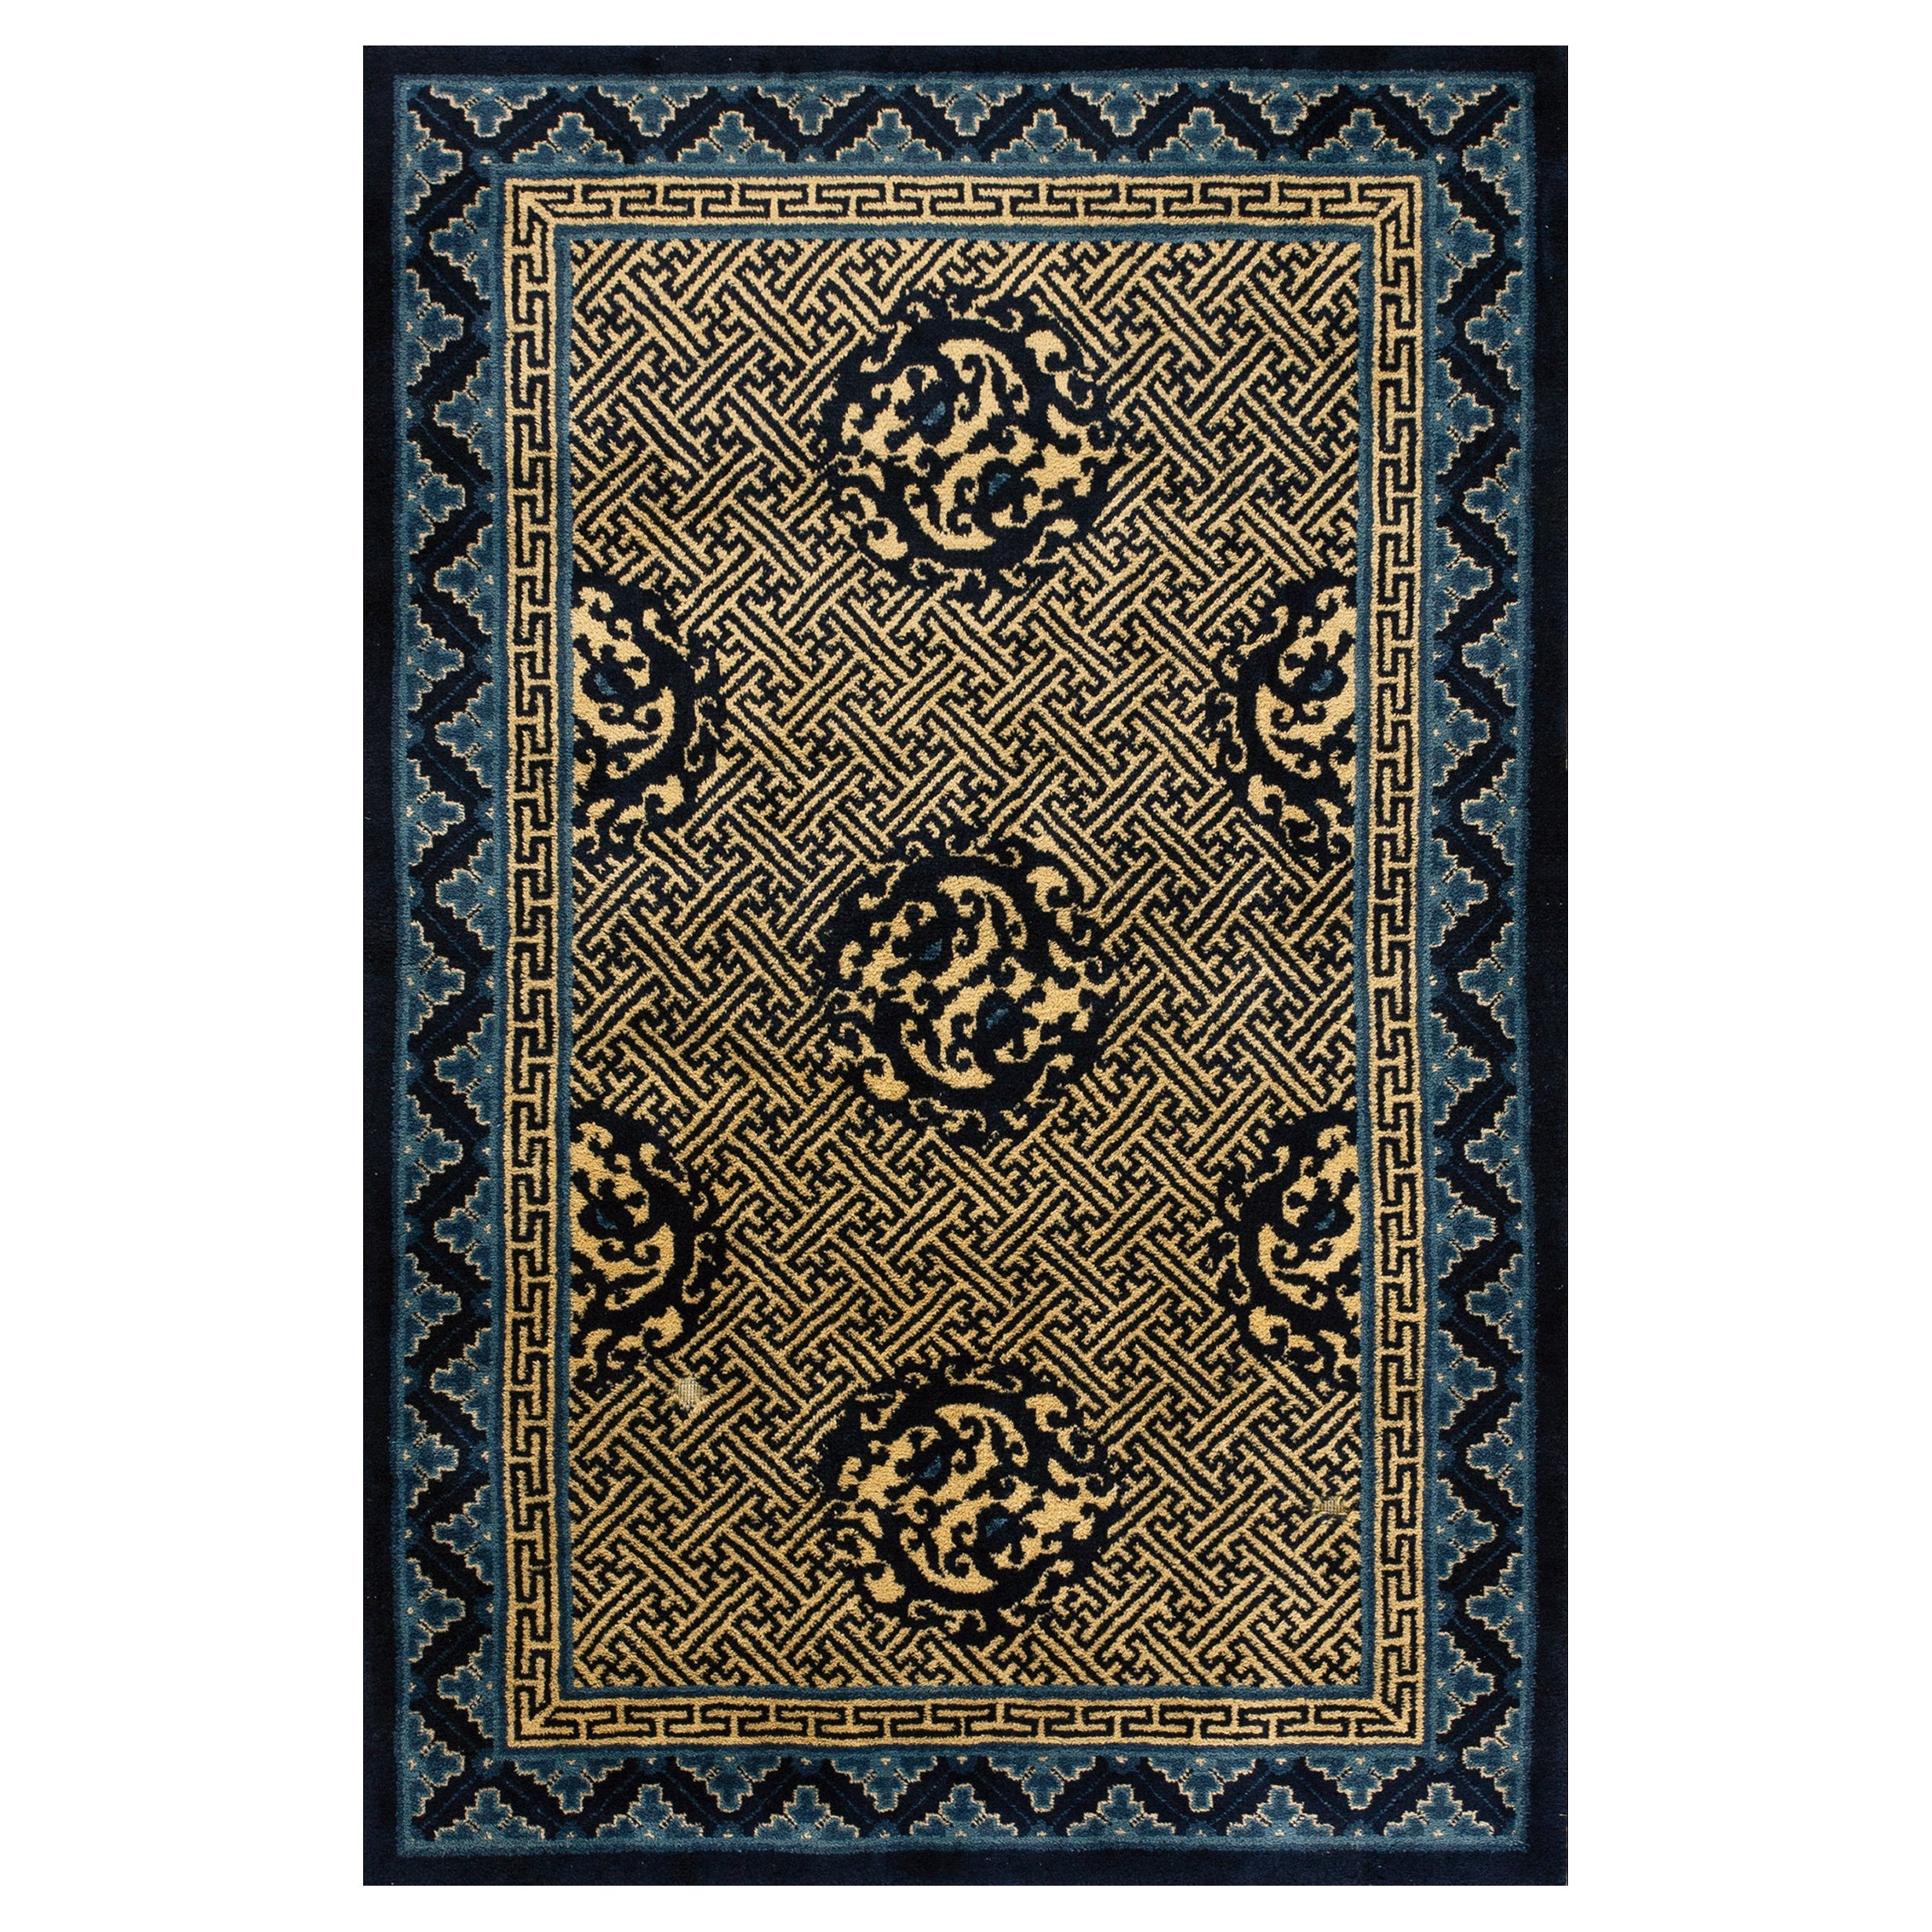 Early 20th Century Chinese Peking Dragon Carpet ( 4'2" x 6'3" - 127 x 191 ) For Sale